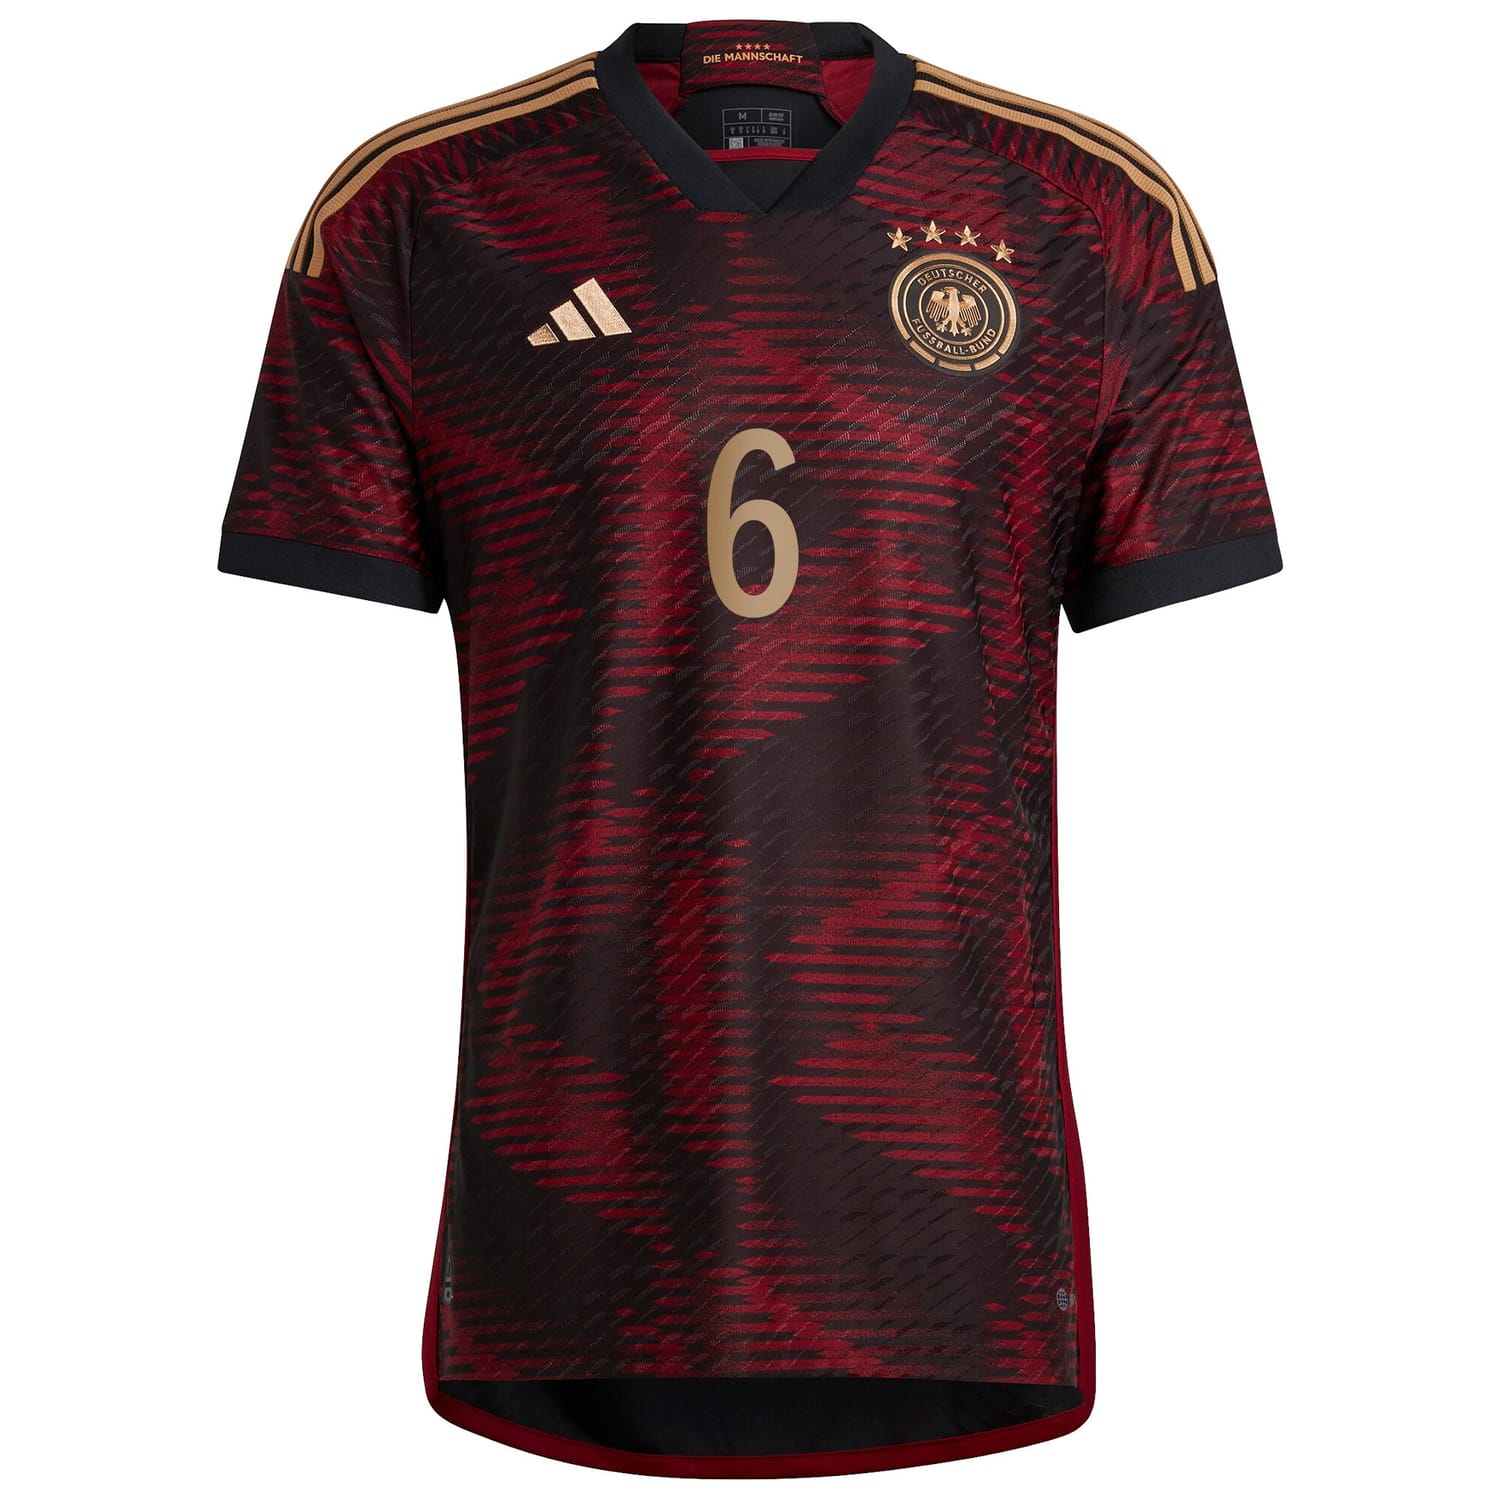 Germany National Team Away Authentic Jersey Shirt Black 2022-23 player Joshua Kimmich printing for Men